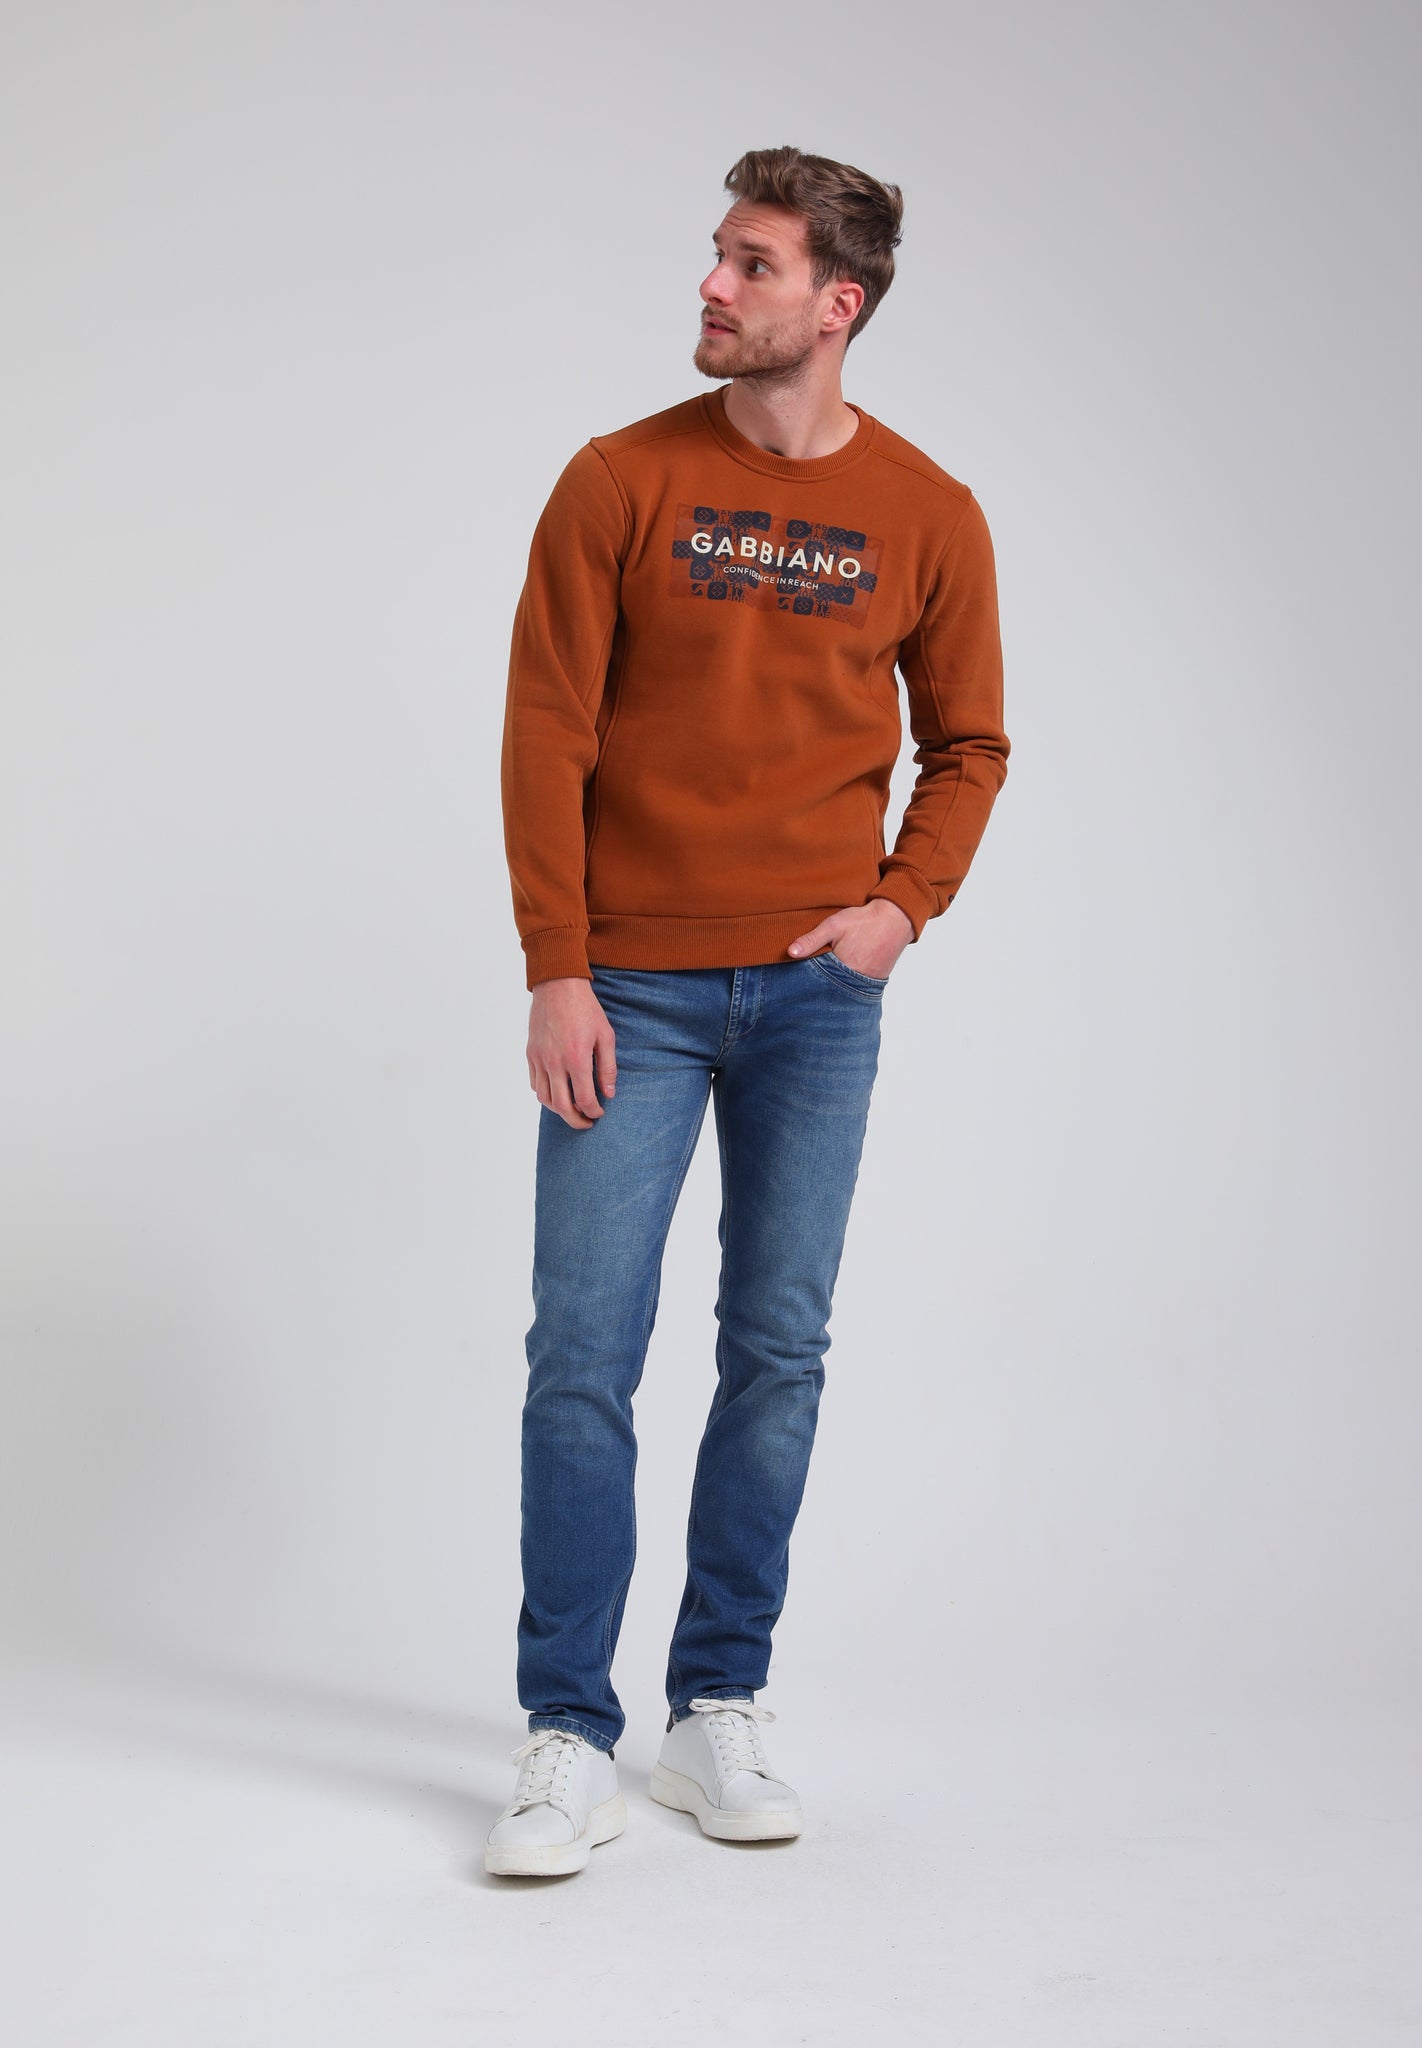 Branded sweater 3.0 | Copper